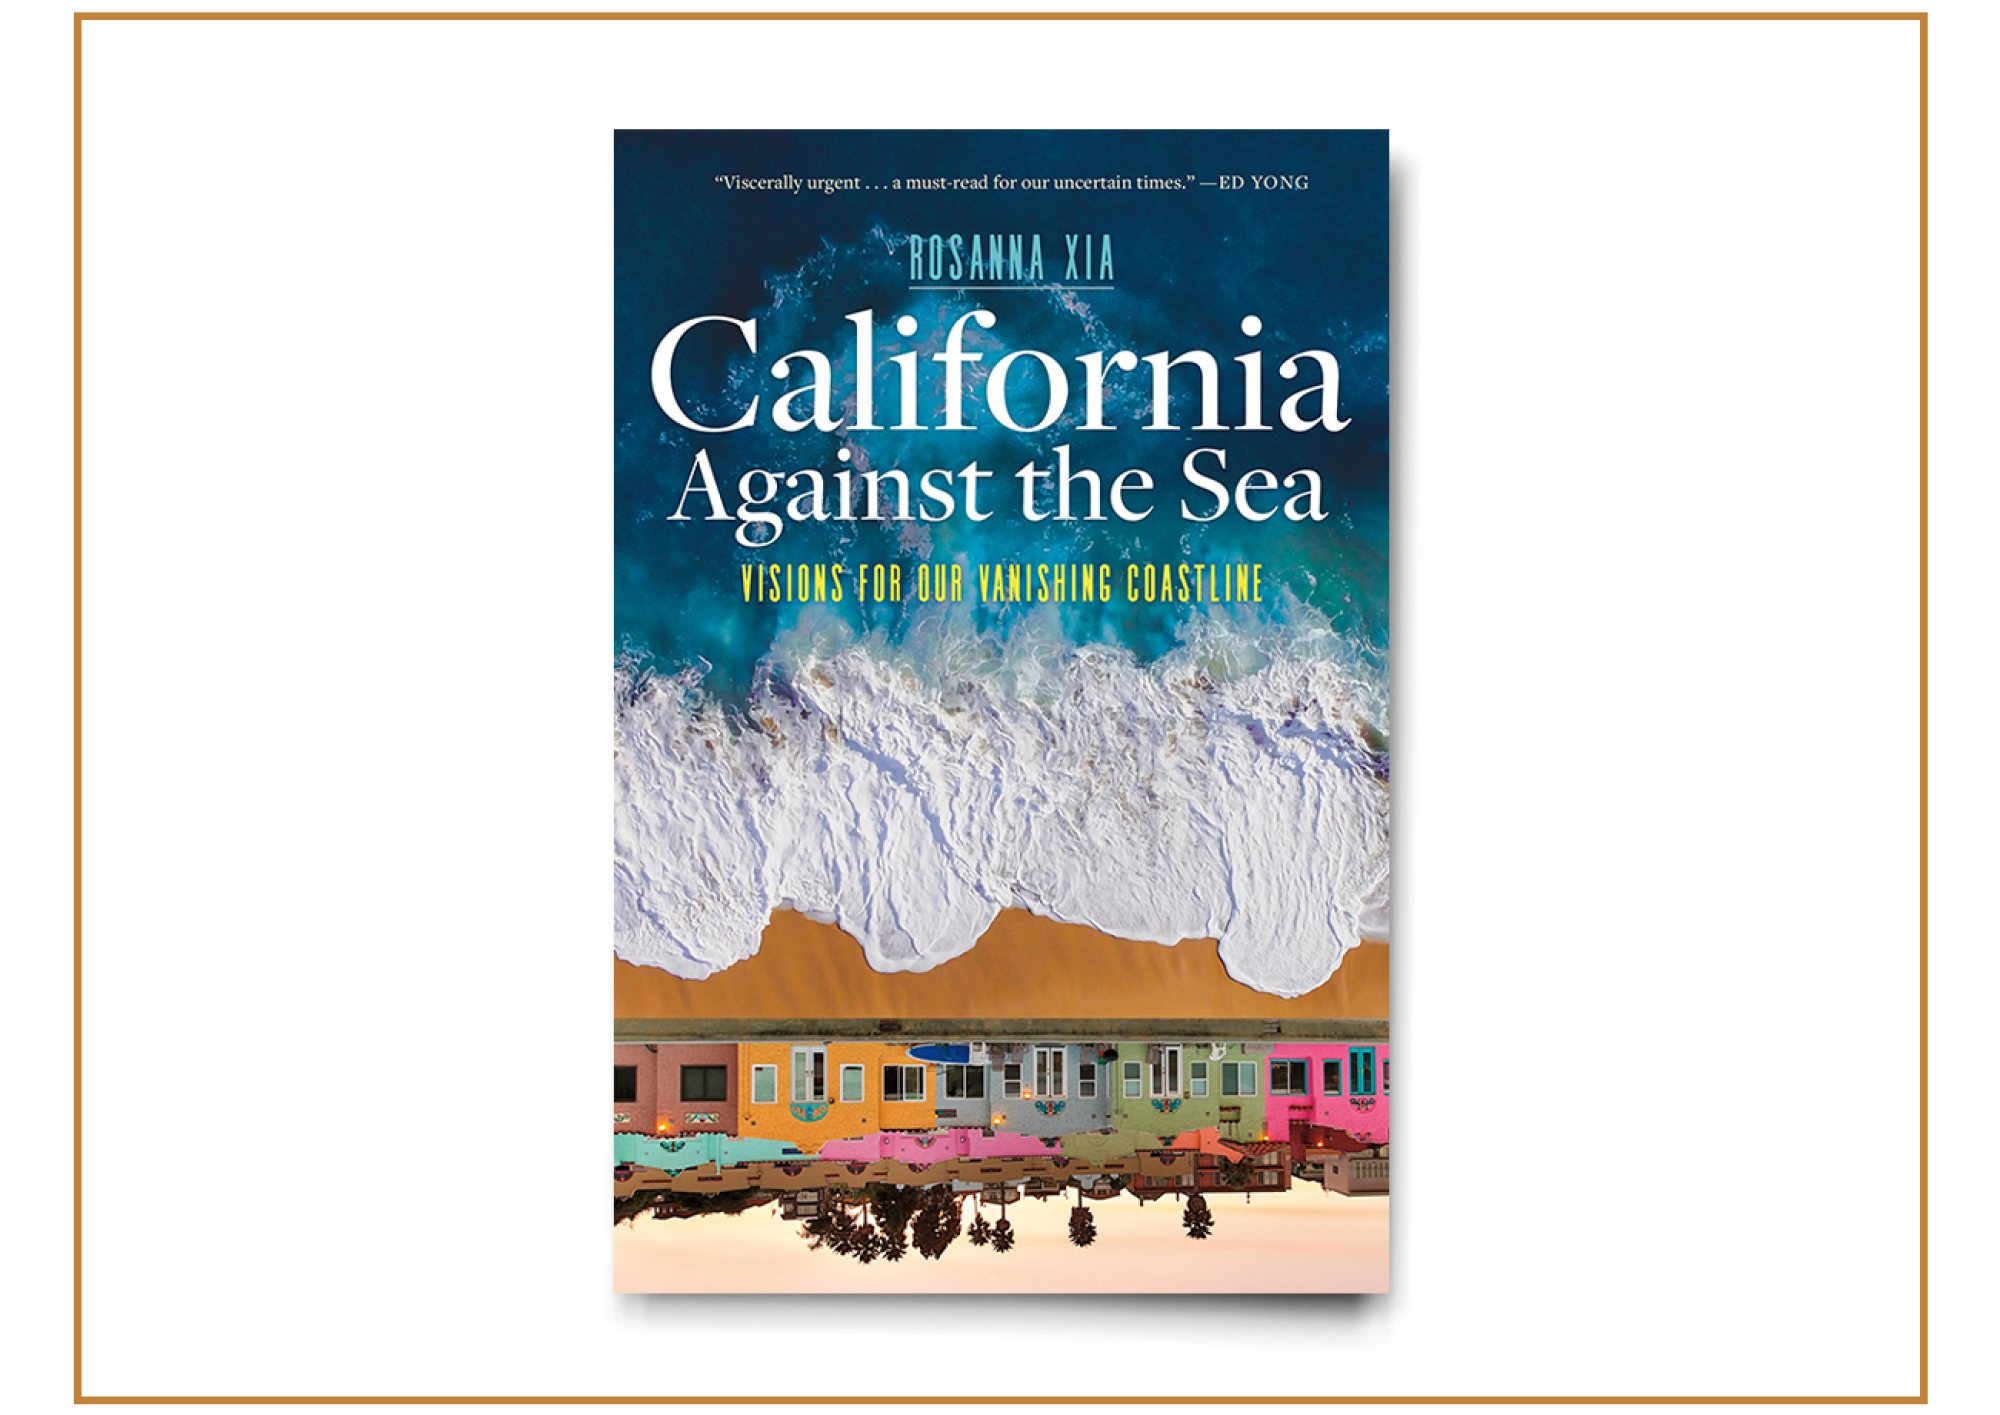 Image of book cover for "California Against the Sea."